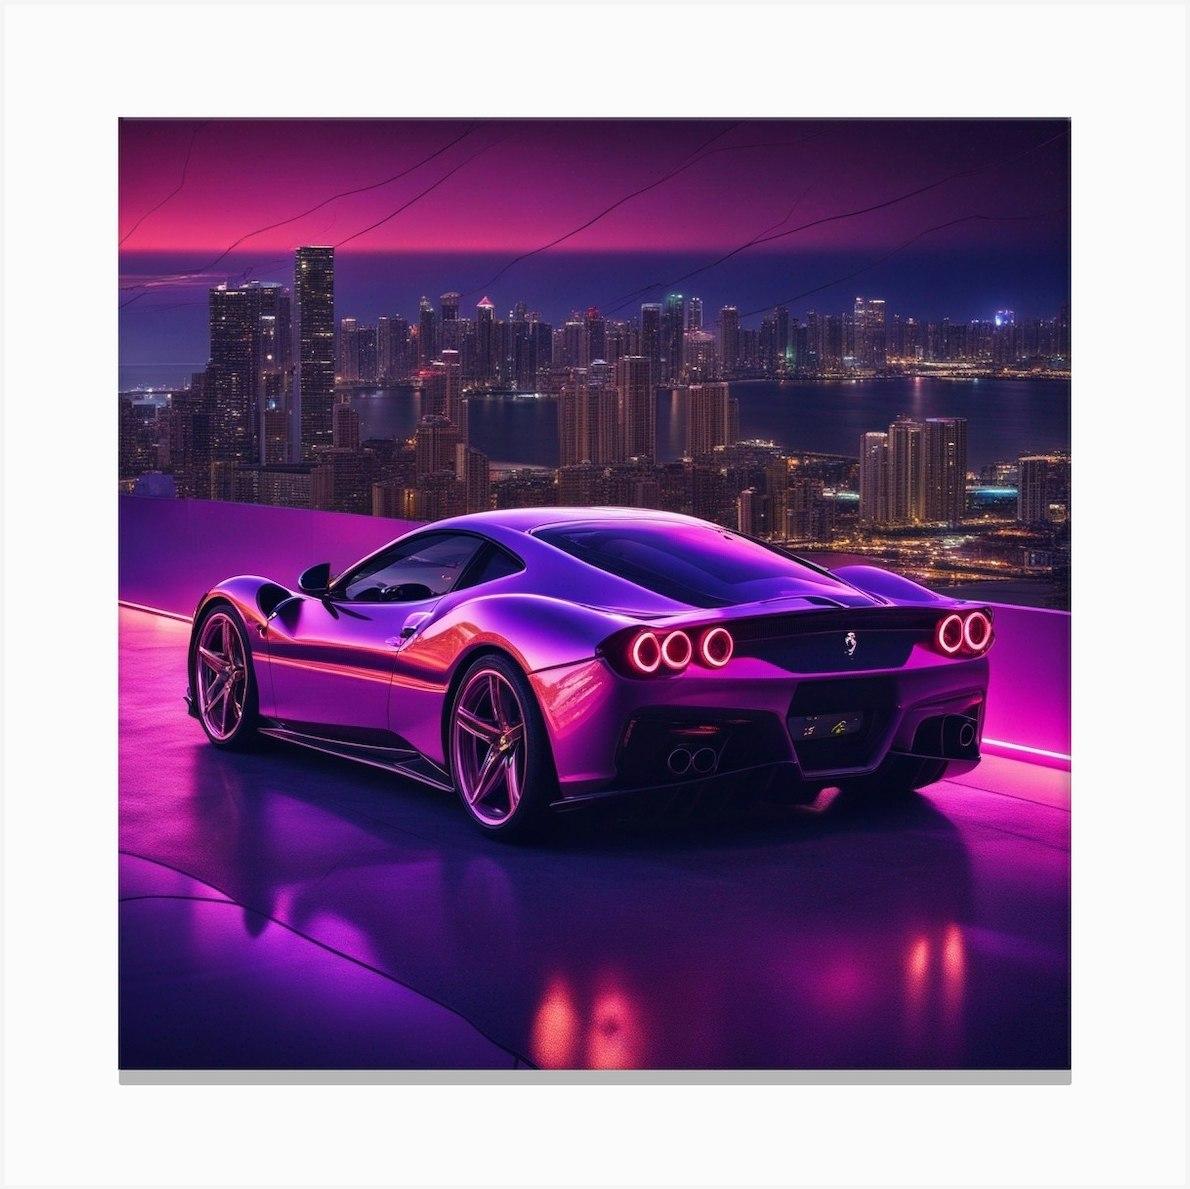 Ferrari Car Overlooking The Miami Skyline At Night S Print By